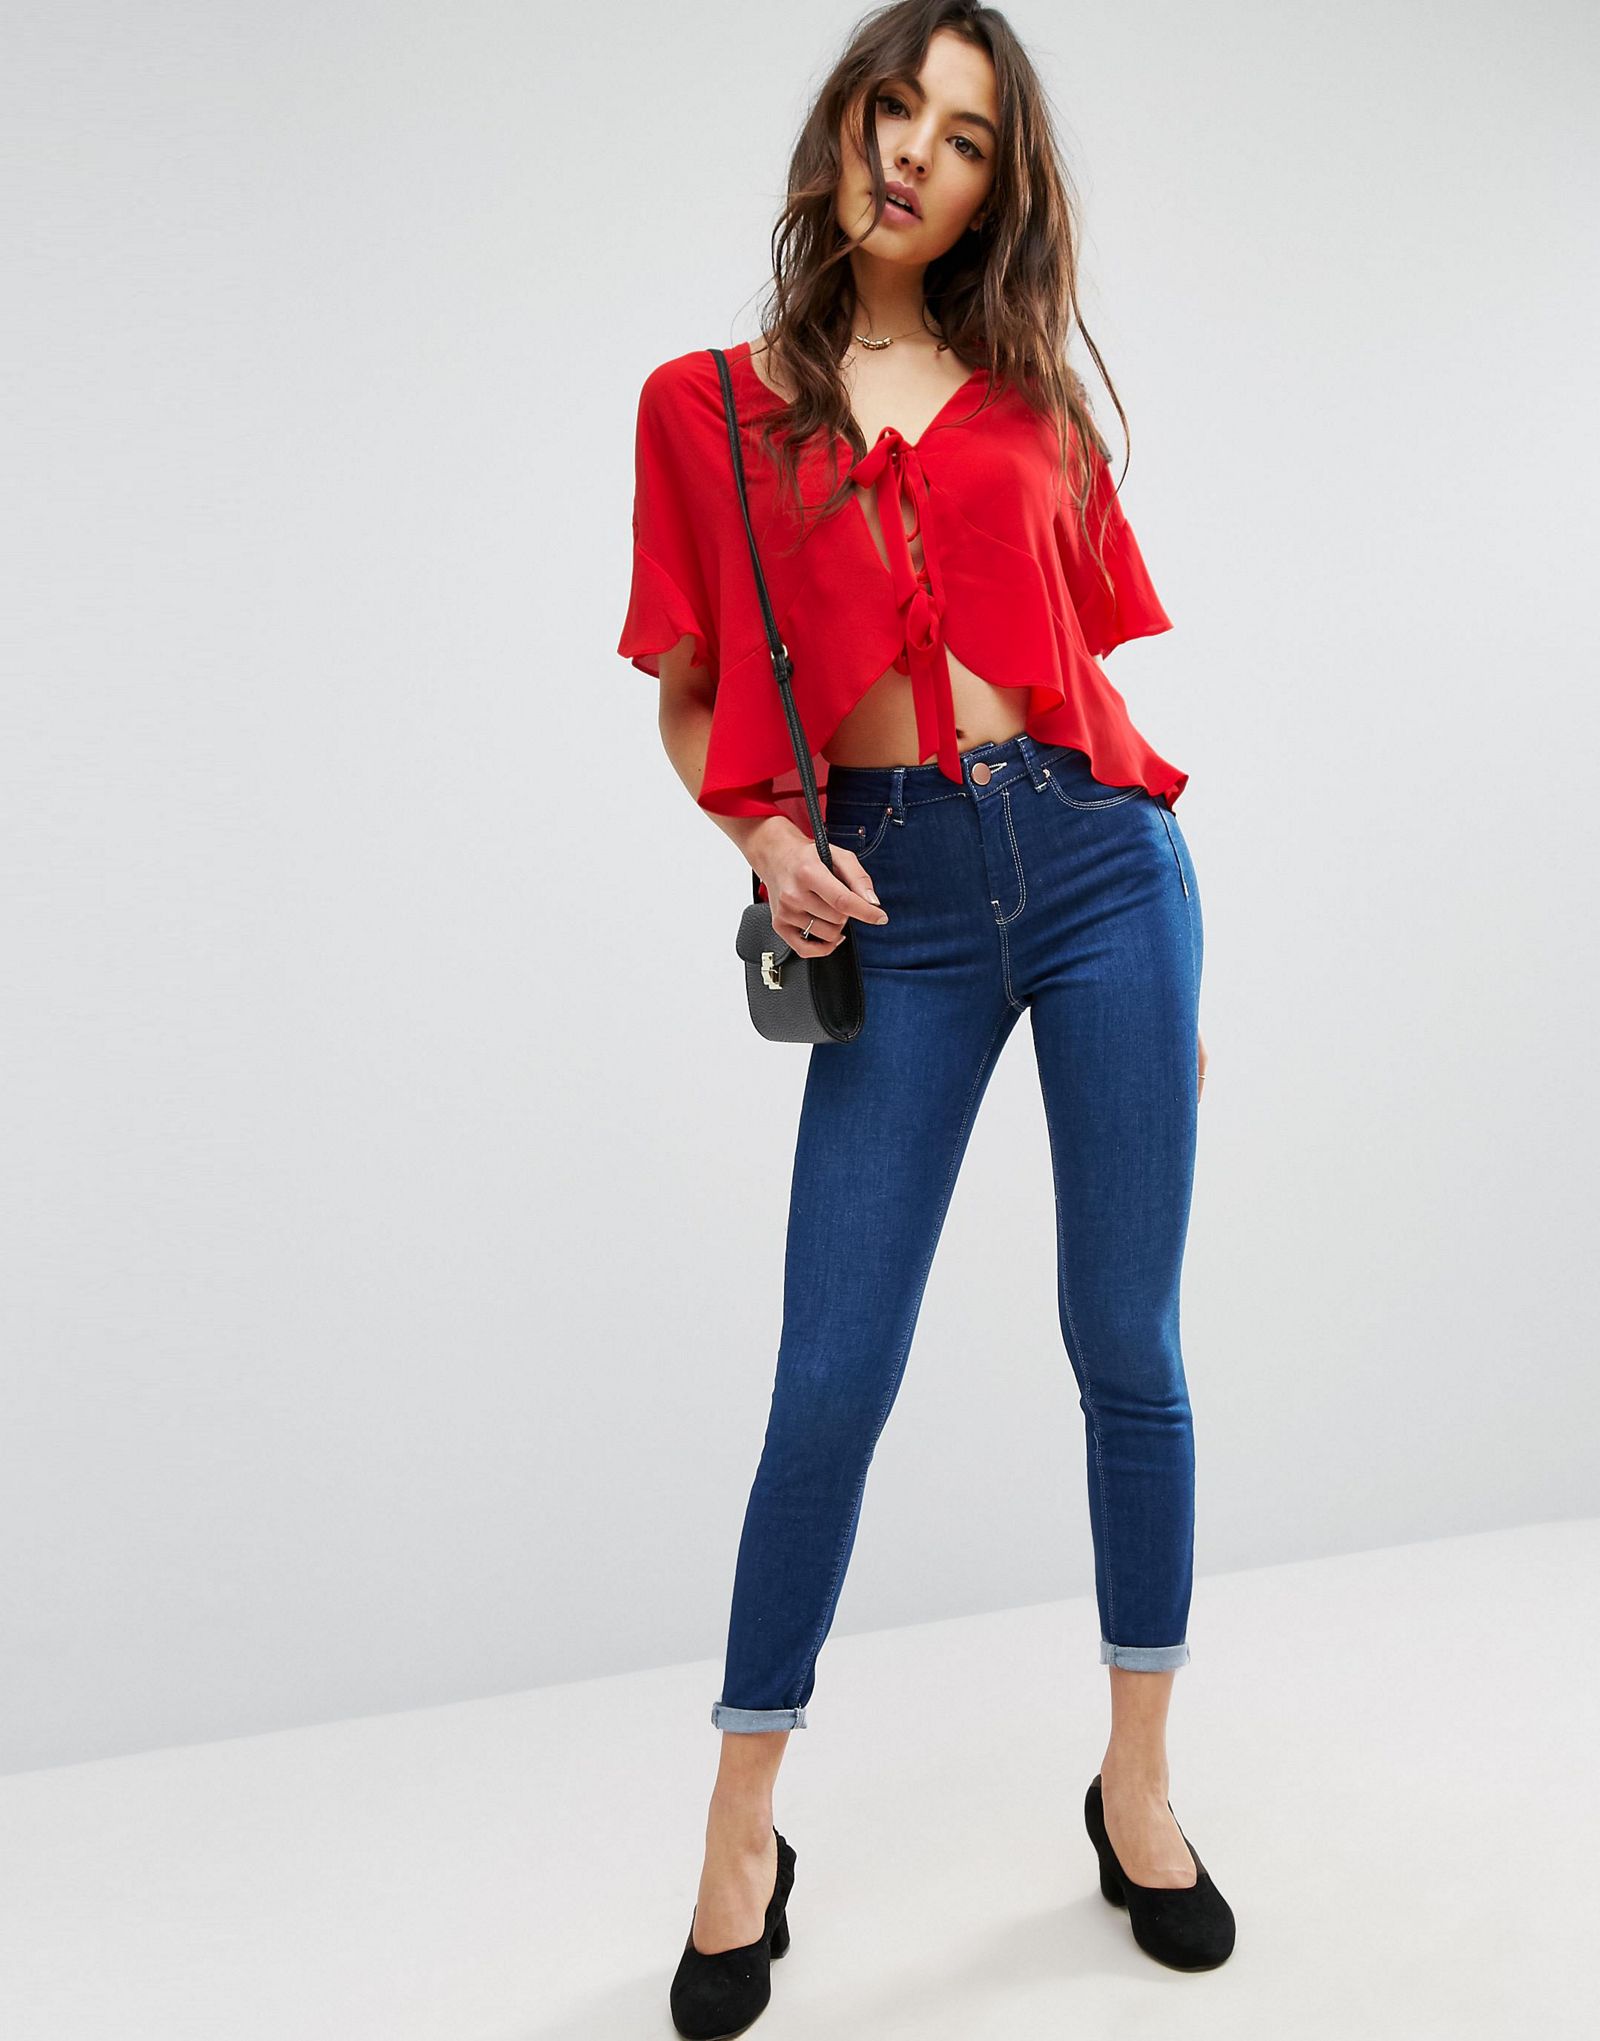 ASOS Tie Front Blouse with Frill Sleeve